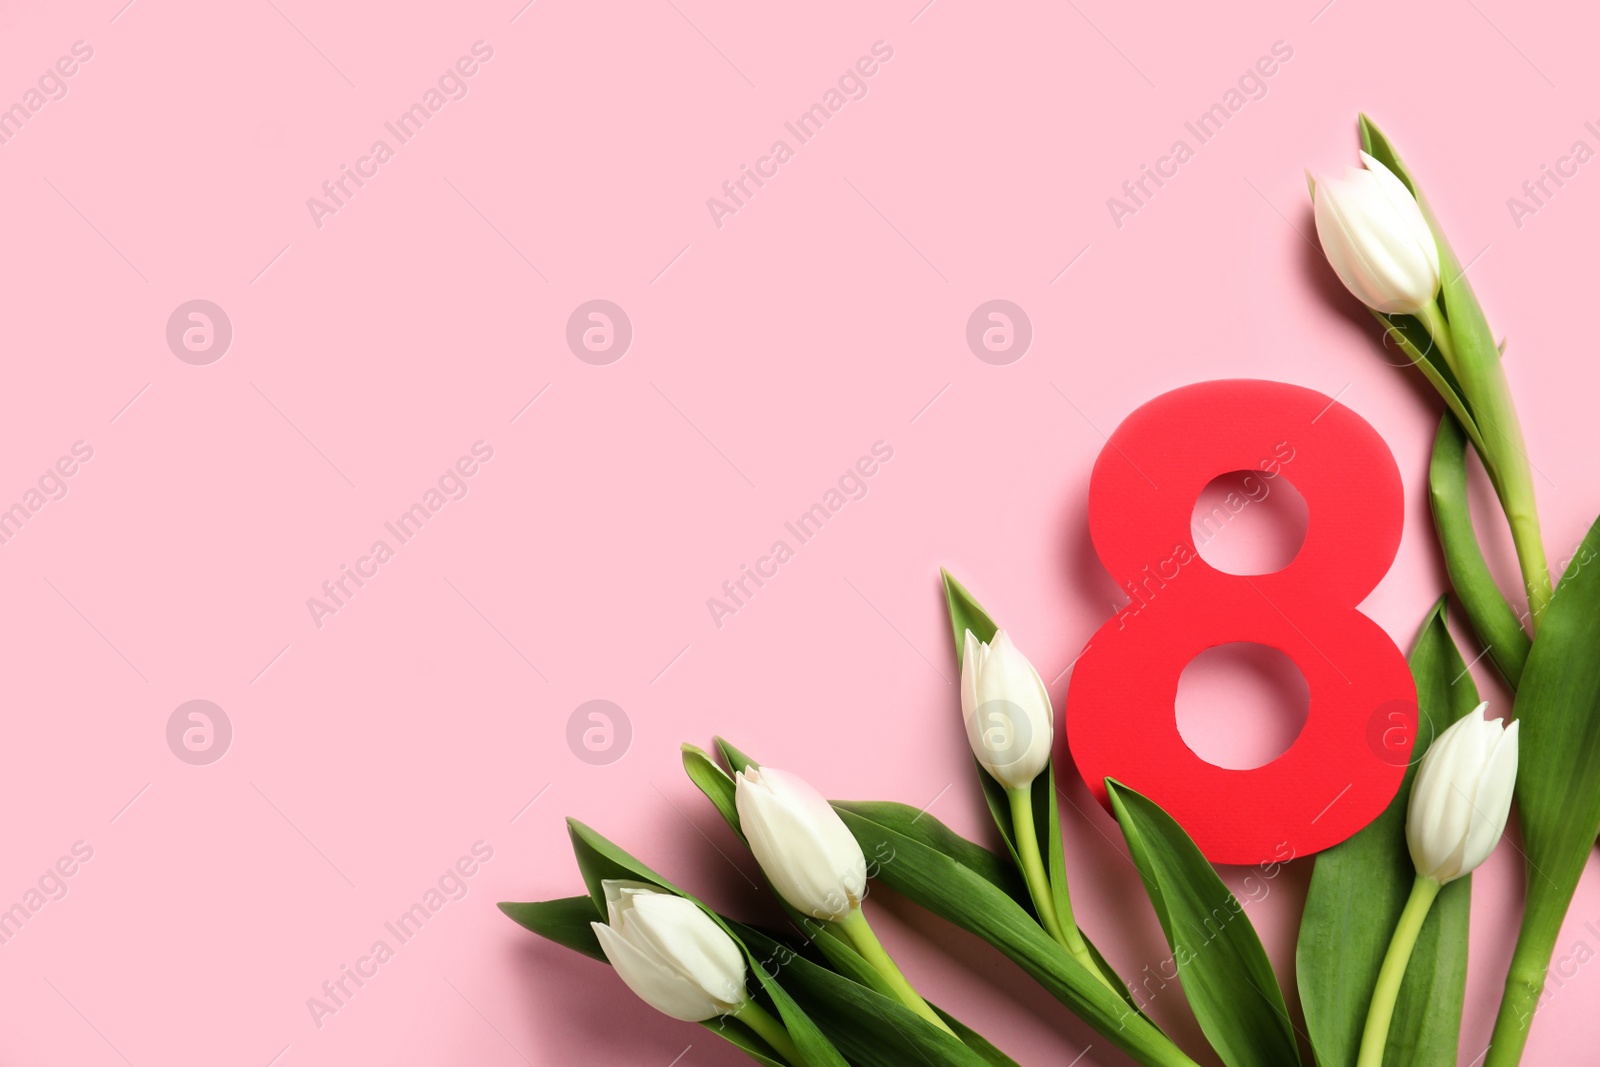 Photo of 8 March card design with tulips and space for text on pink background, flat lay. International Women's Day